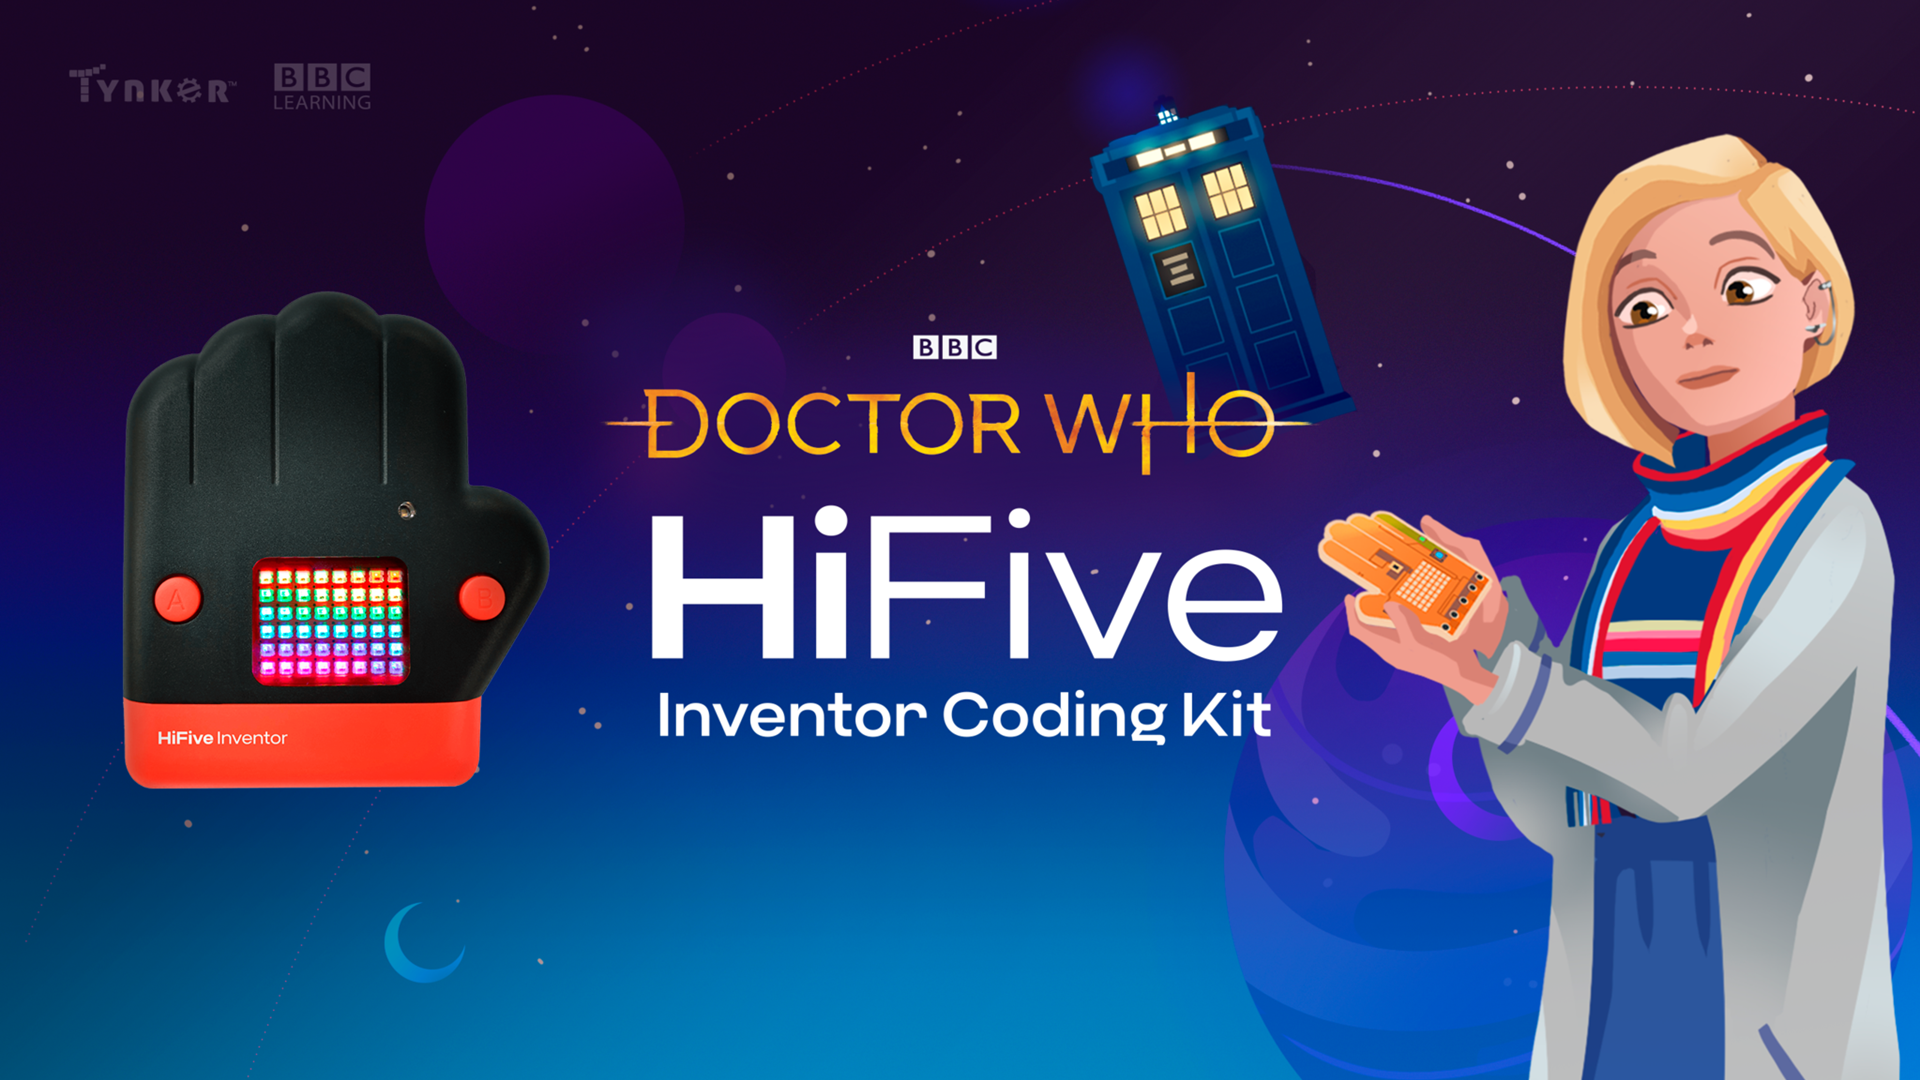 The BBC ‘Doctor Who’ Inventor Equipment Teaches You to Code With Jodie Whittaker